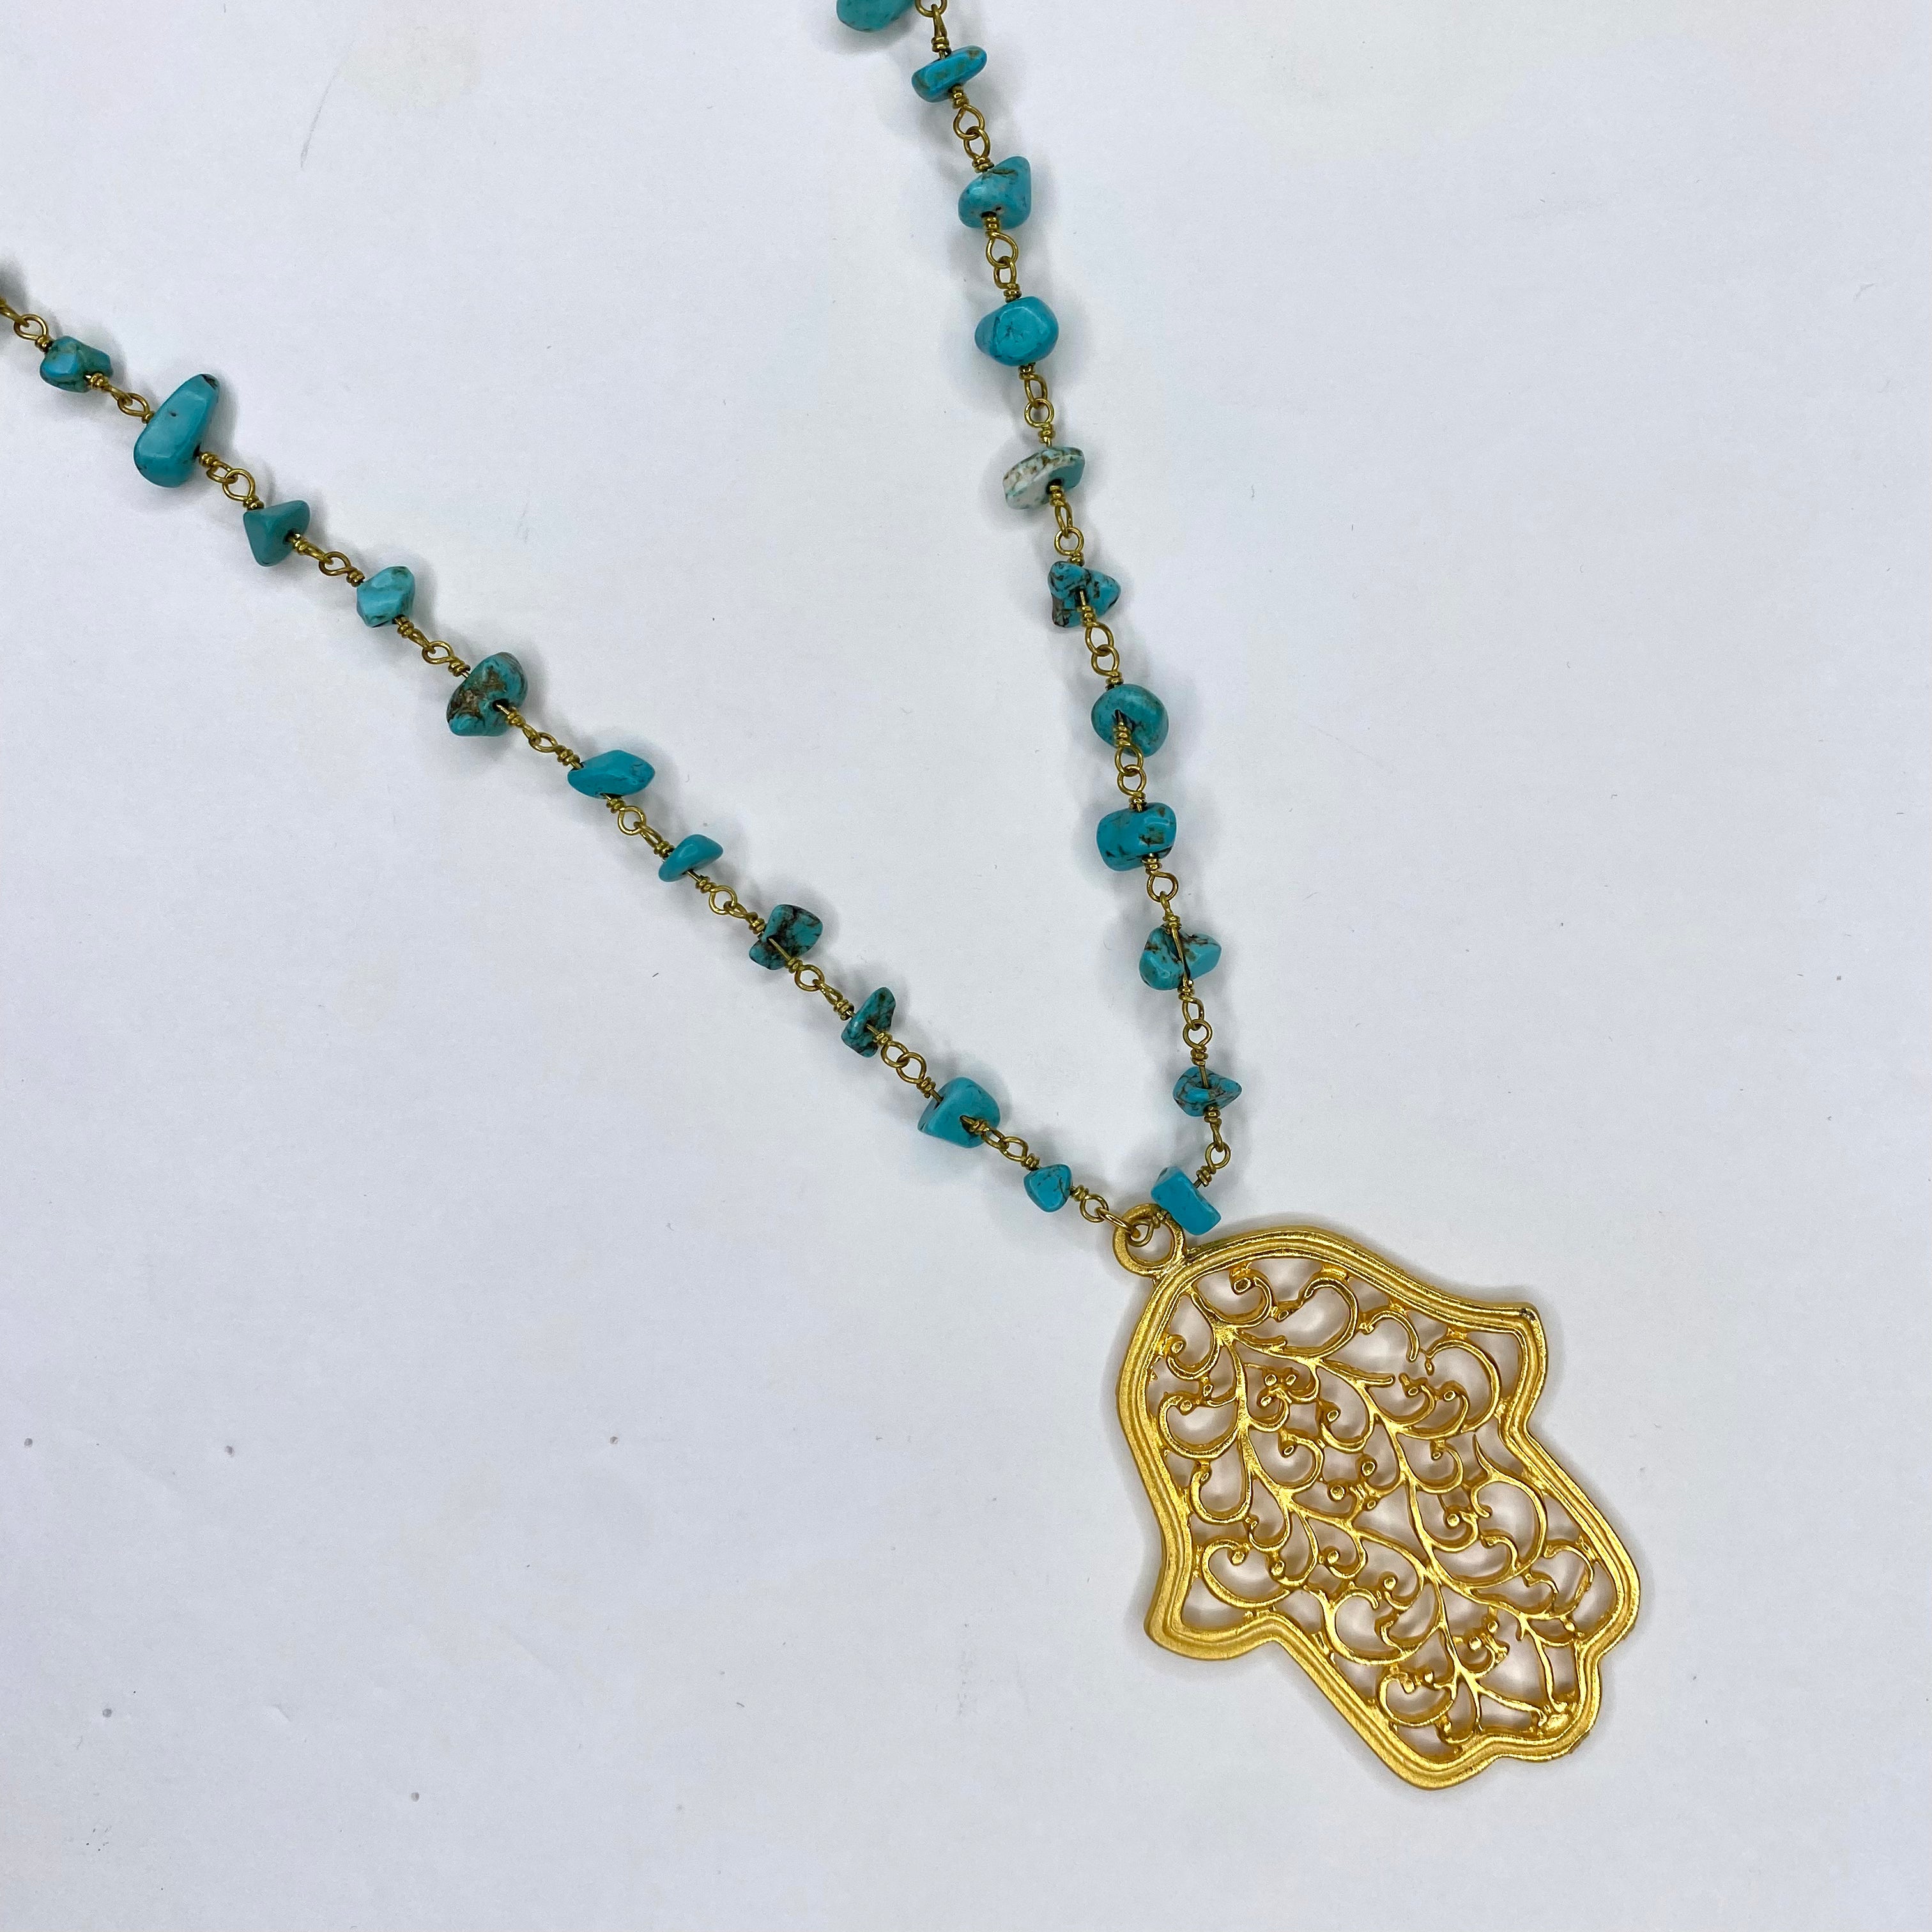 Turquoise Gemstone Chips Chain with Gold Filigree Hamsa Necklace